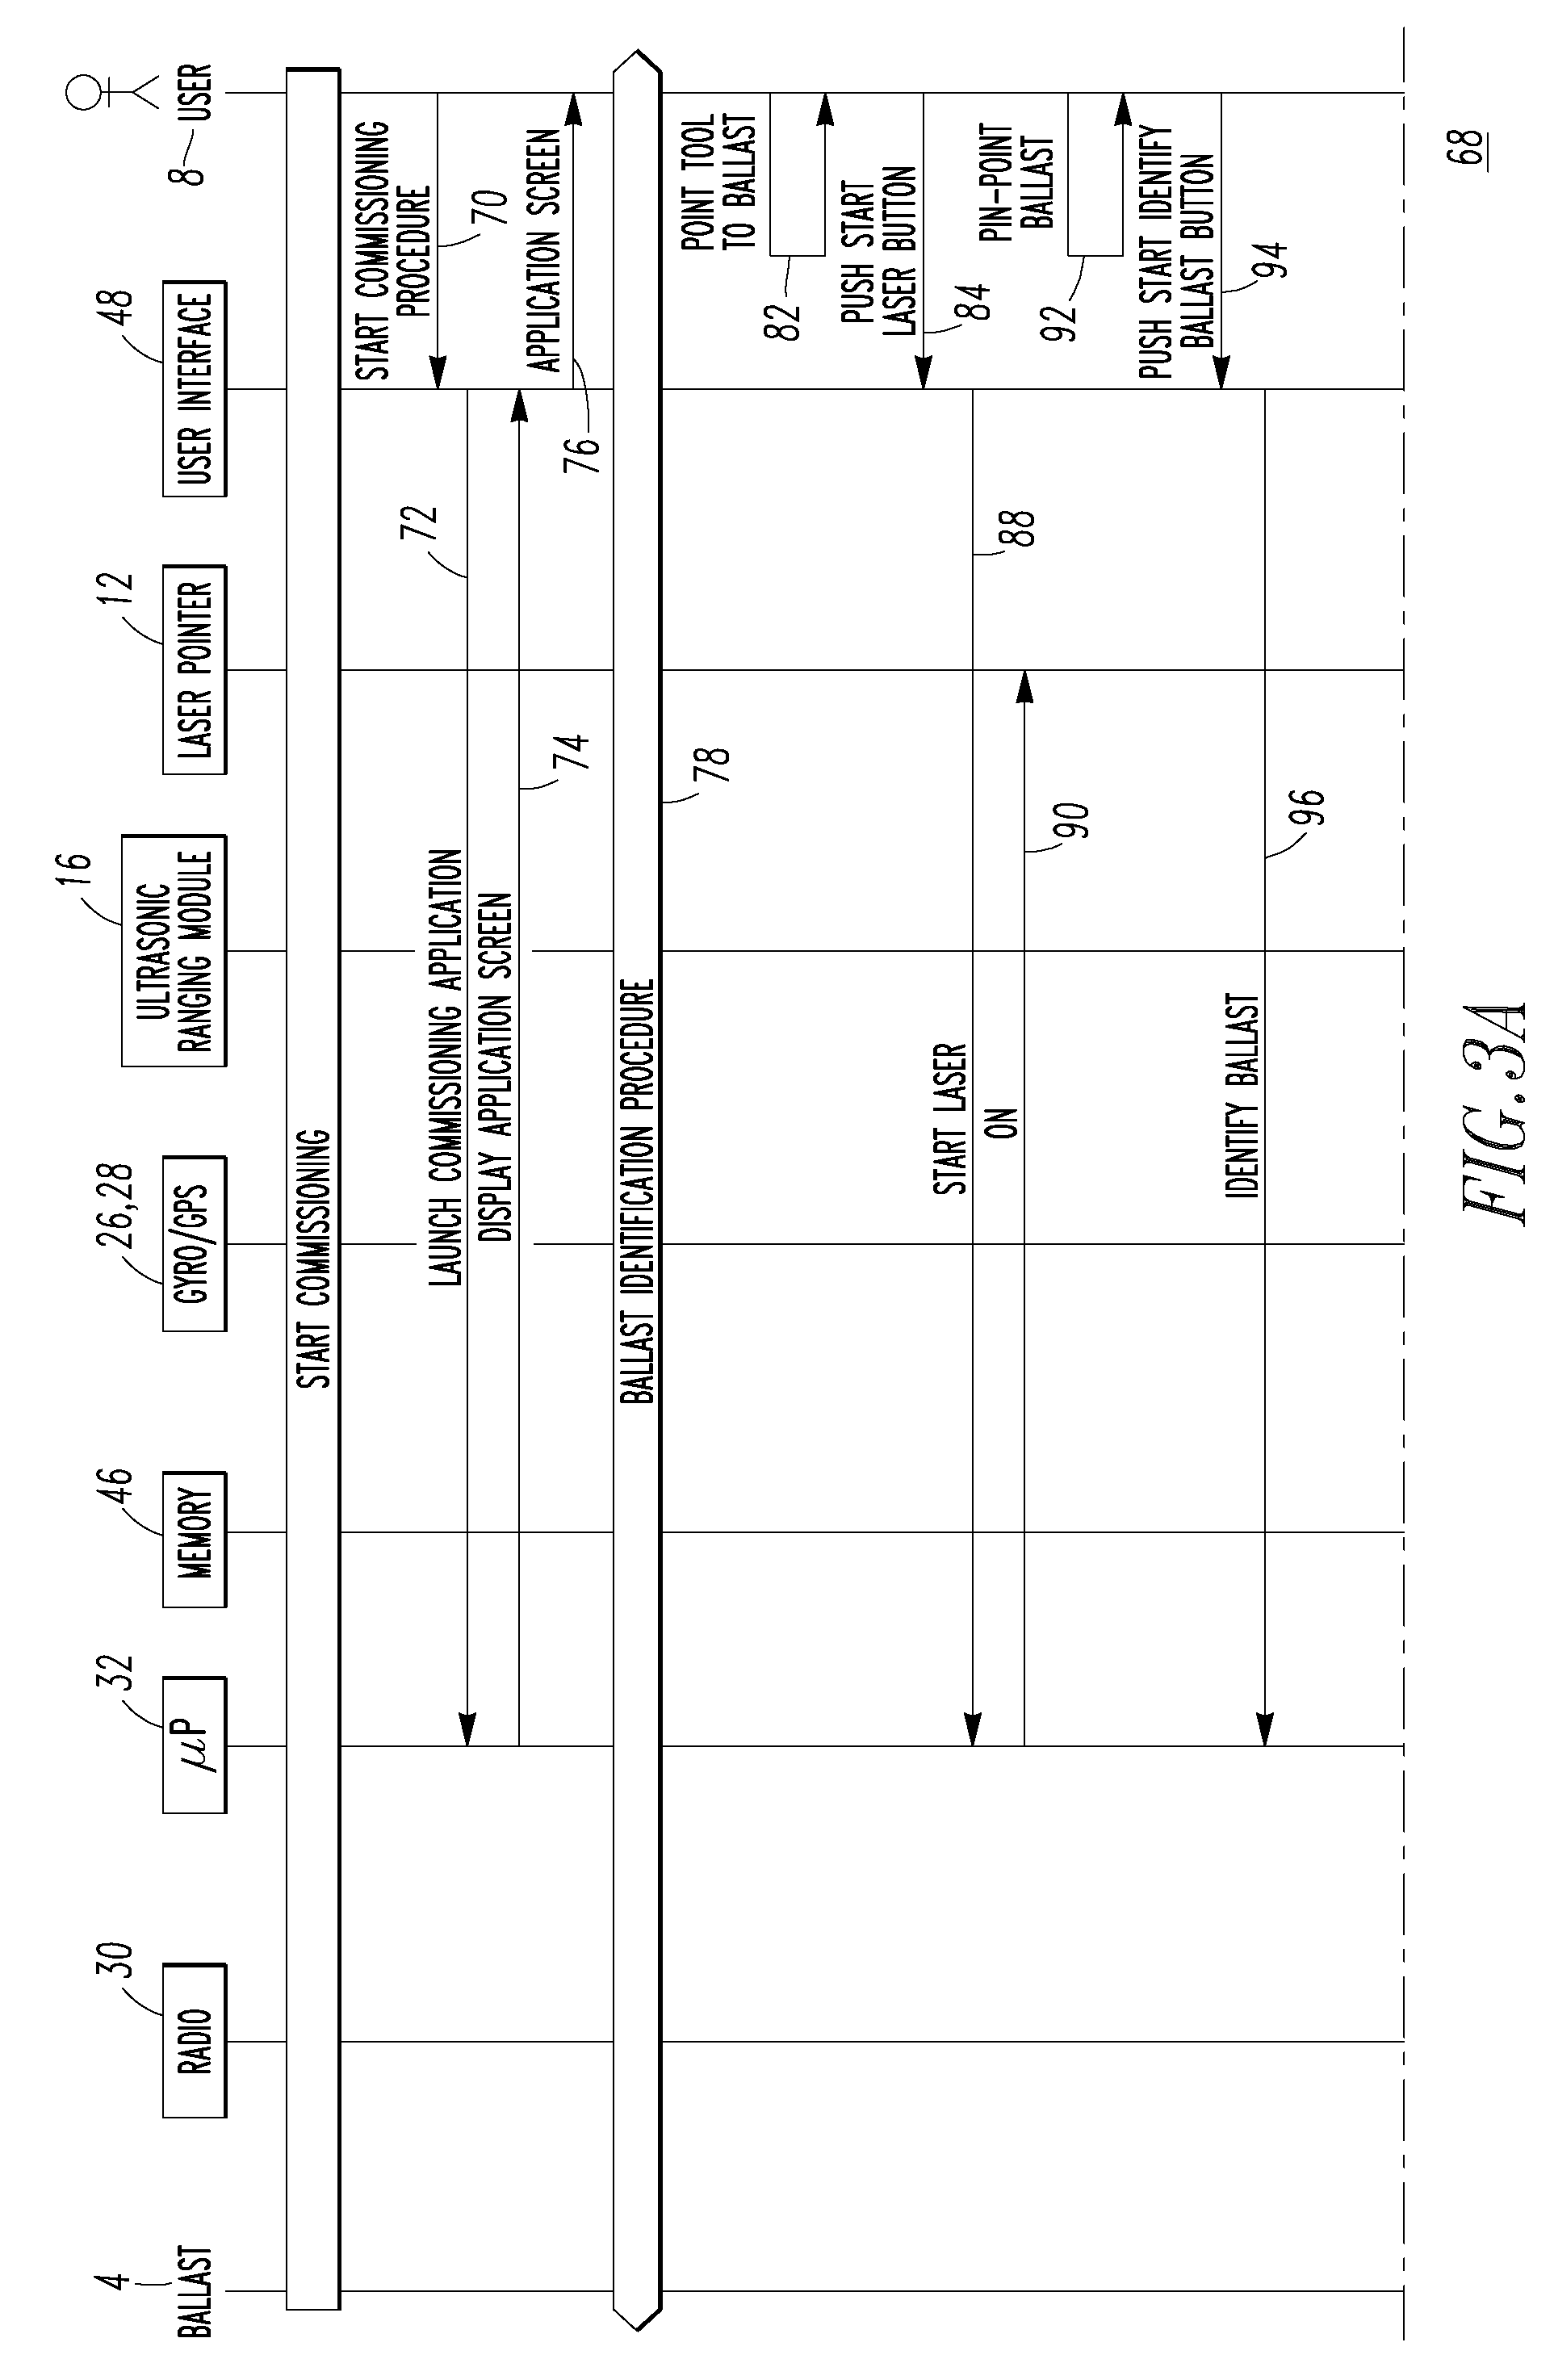 Commissioning tool, commissioning system and method of commissioning a number of wireless nodes